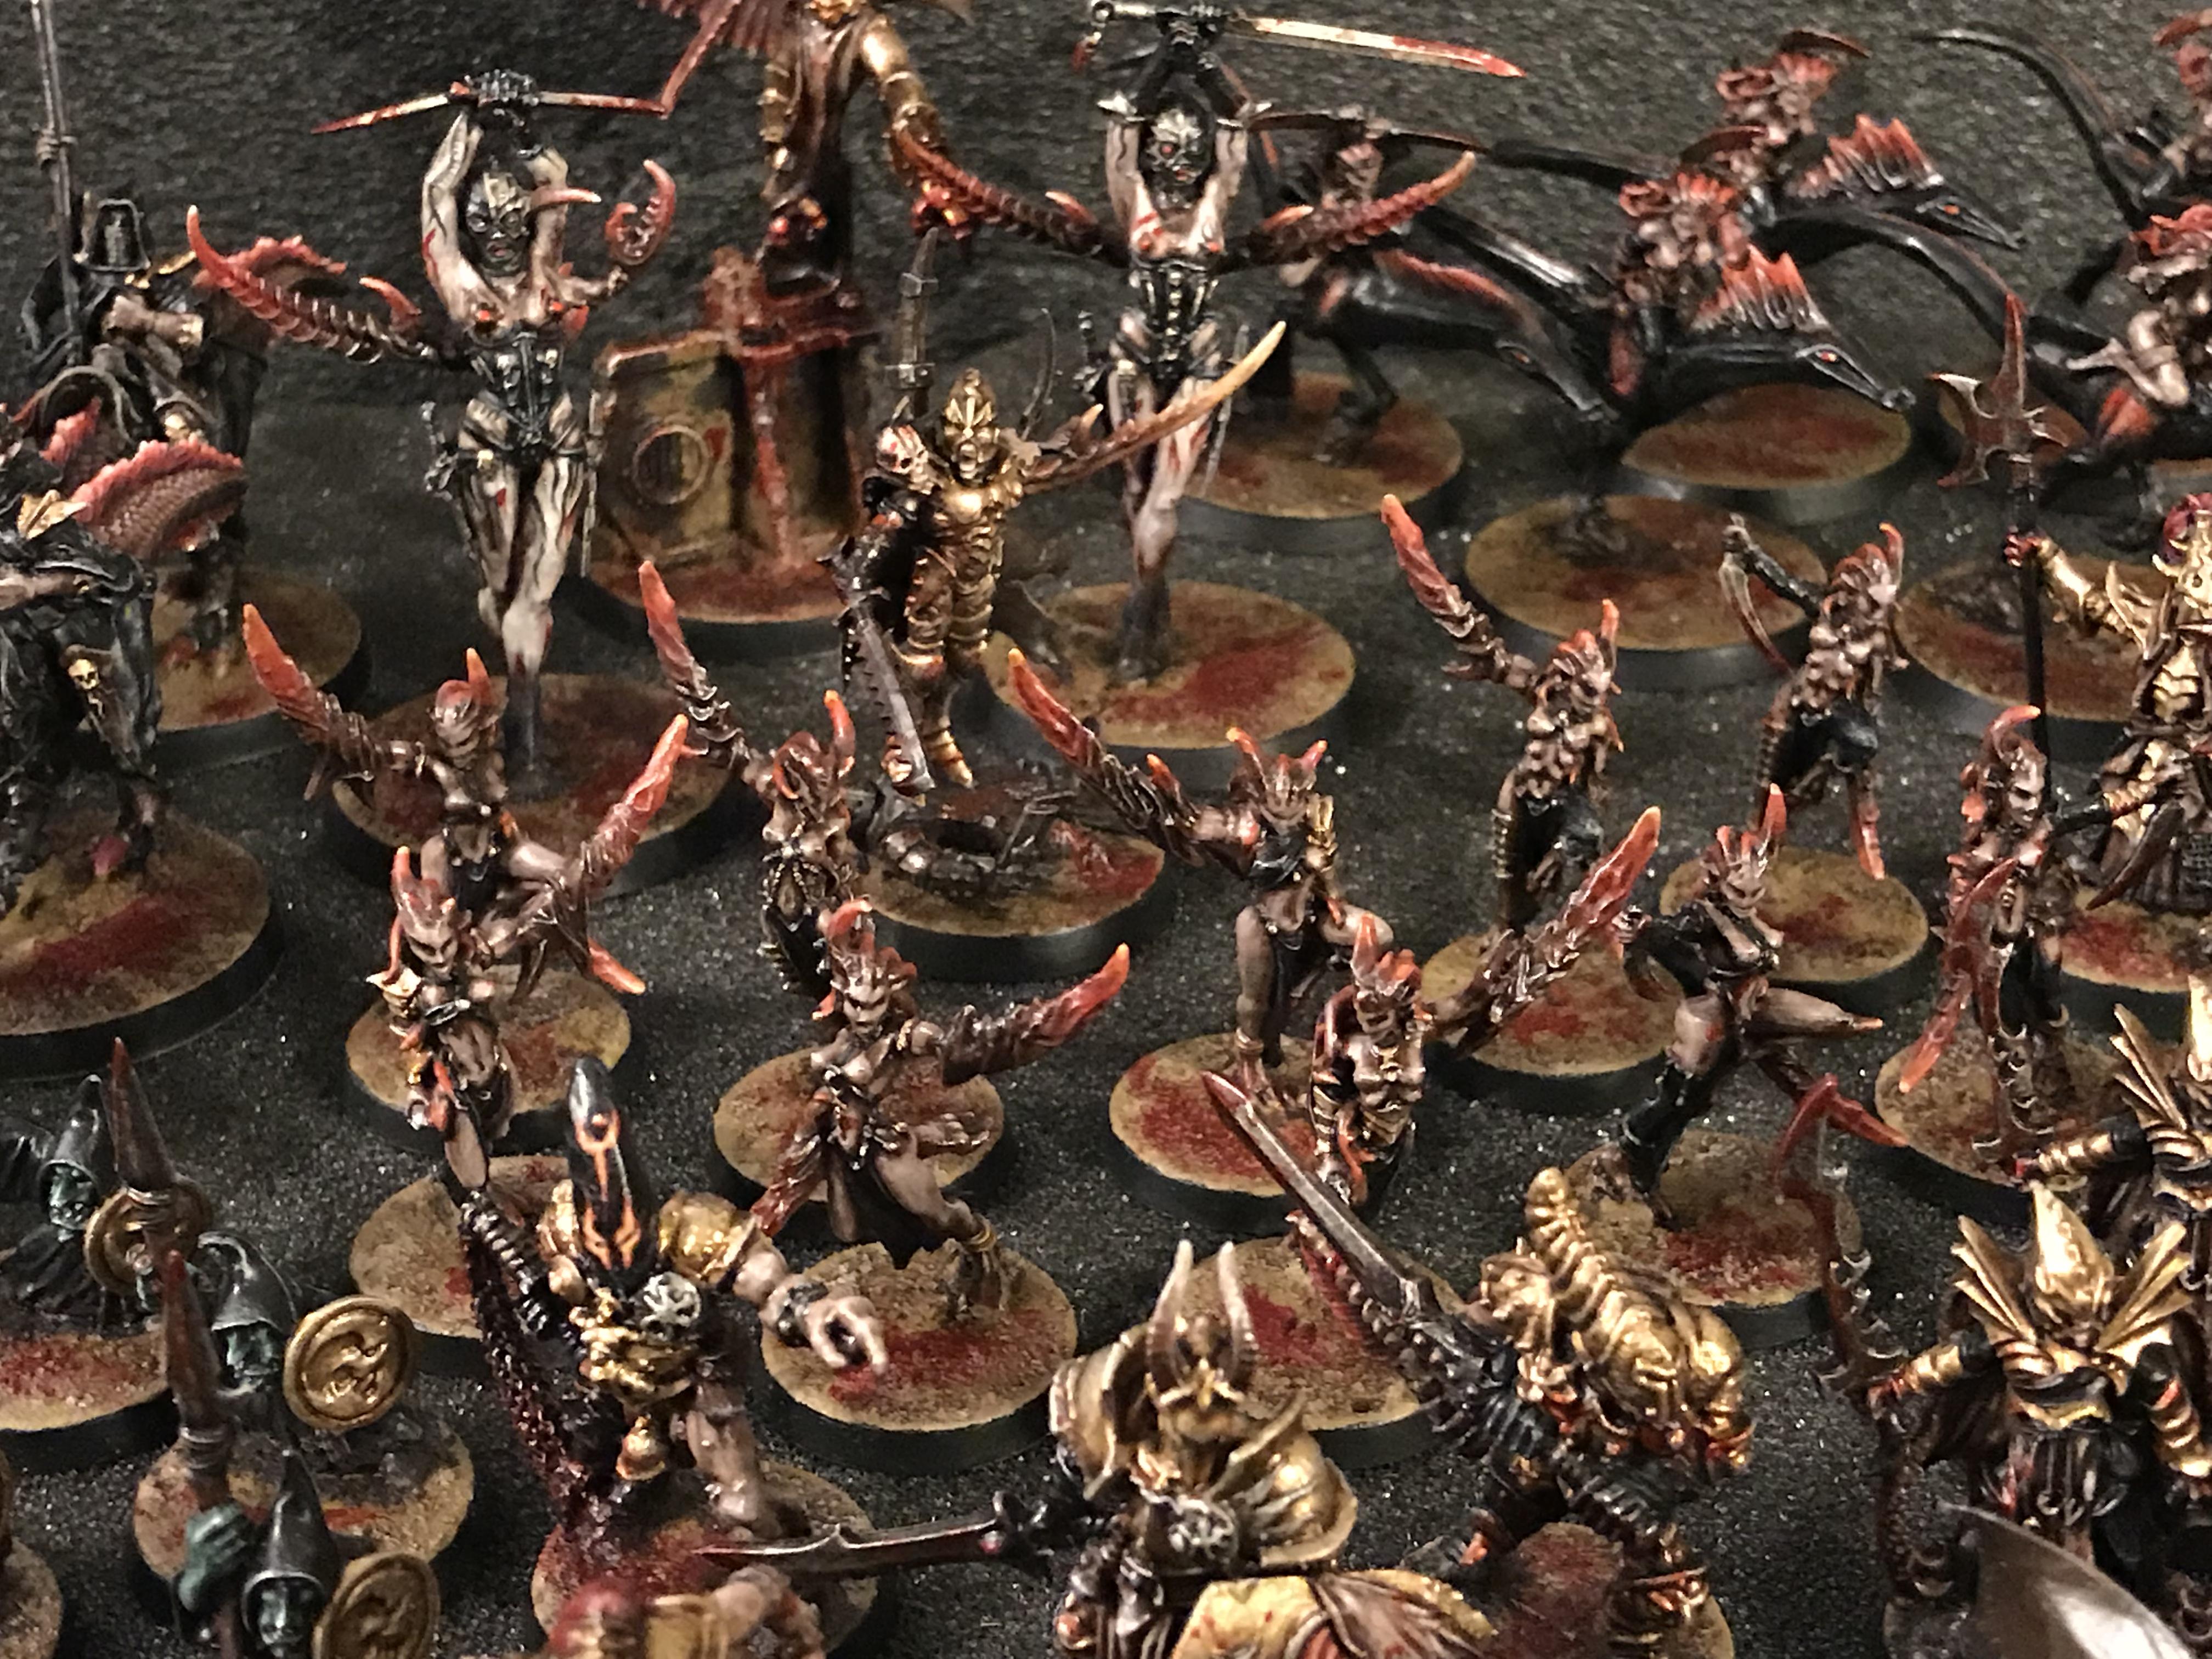 Aef, Aelves, Age, Agony, Aos28, Army, Battle, Chaos, Cosmic, Cult, Cultists, Daemonic, Daemons, Dark, Darkness, Decadence, Druchii, Eldritch, Elves, Excess, Gold, Golden, Horrors, Misery, Mordheim, Of, Pain, Pleasure, Progress, Project, Red, Rising, Sigmar, Slaanesh, Slaves, Sun, To, Torture, Warband, Warhammer Fantasy